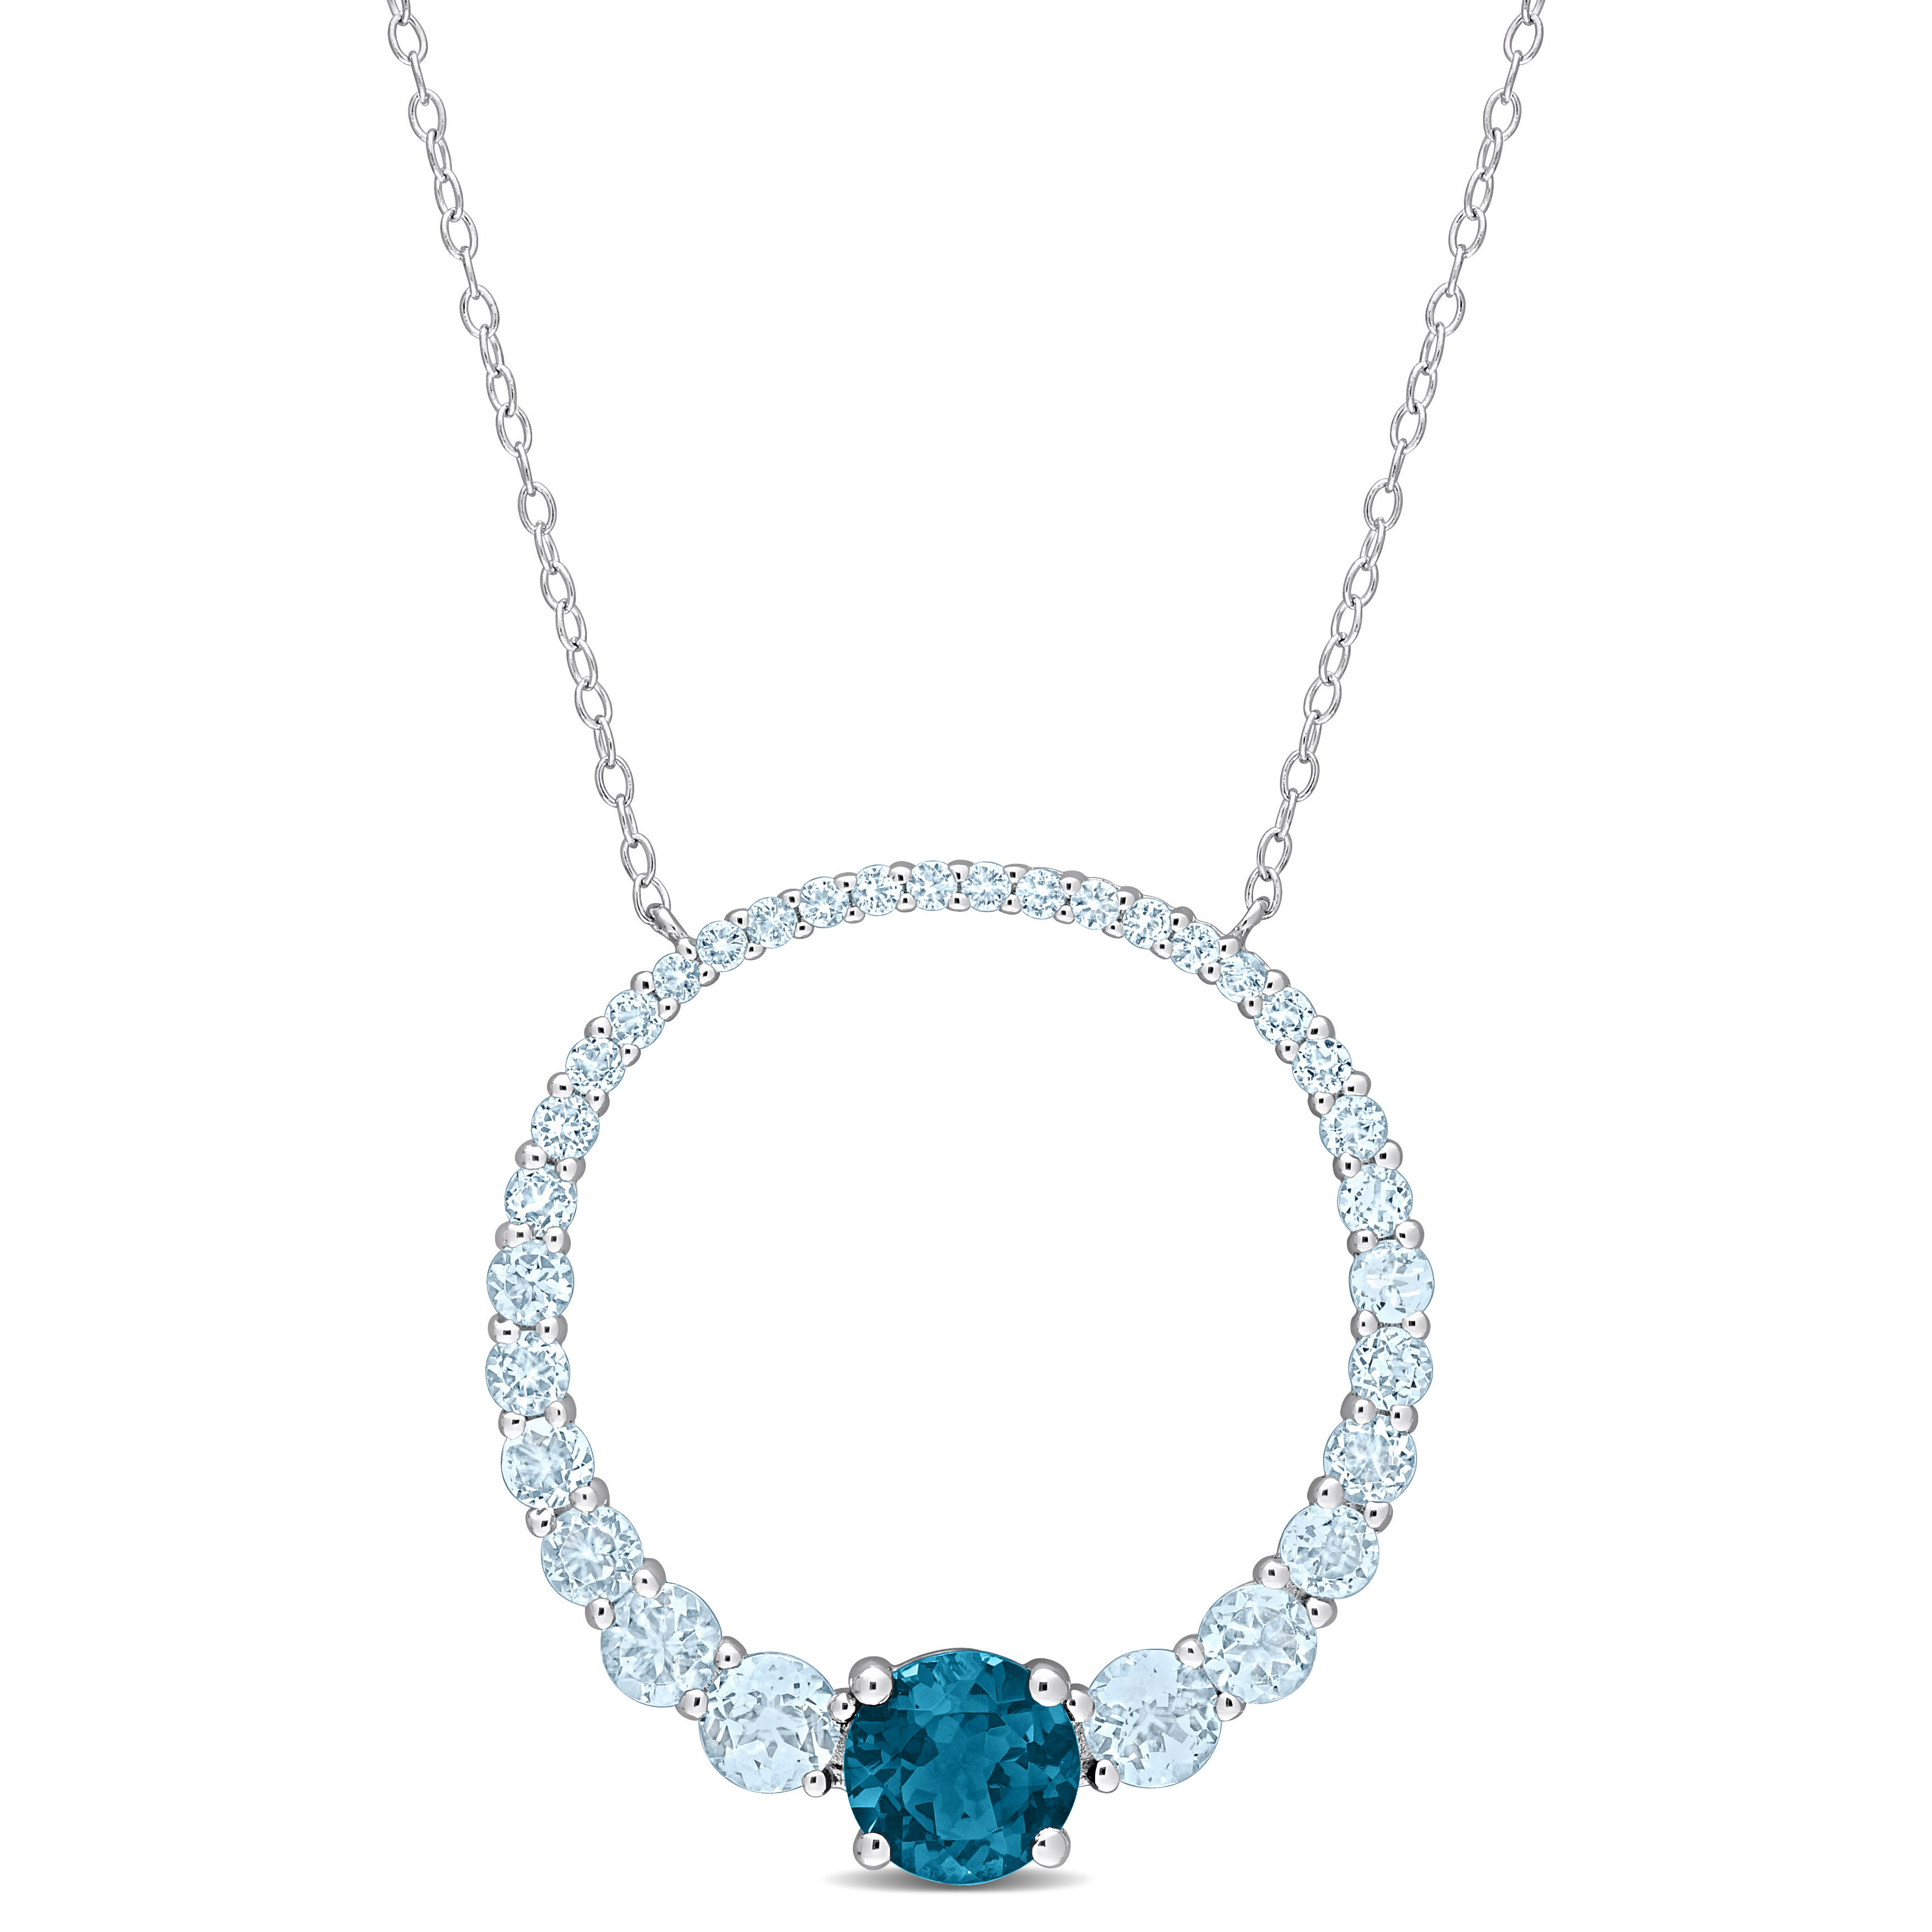 3 7/8 CT TGW Sky Blue Topaz and London Blue Topaz Graduated Open Circle Pendant with Chain in Sterling Silver - 18 in